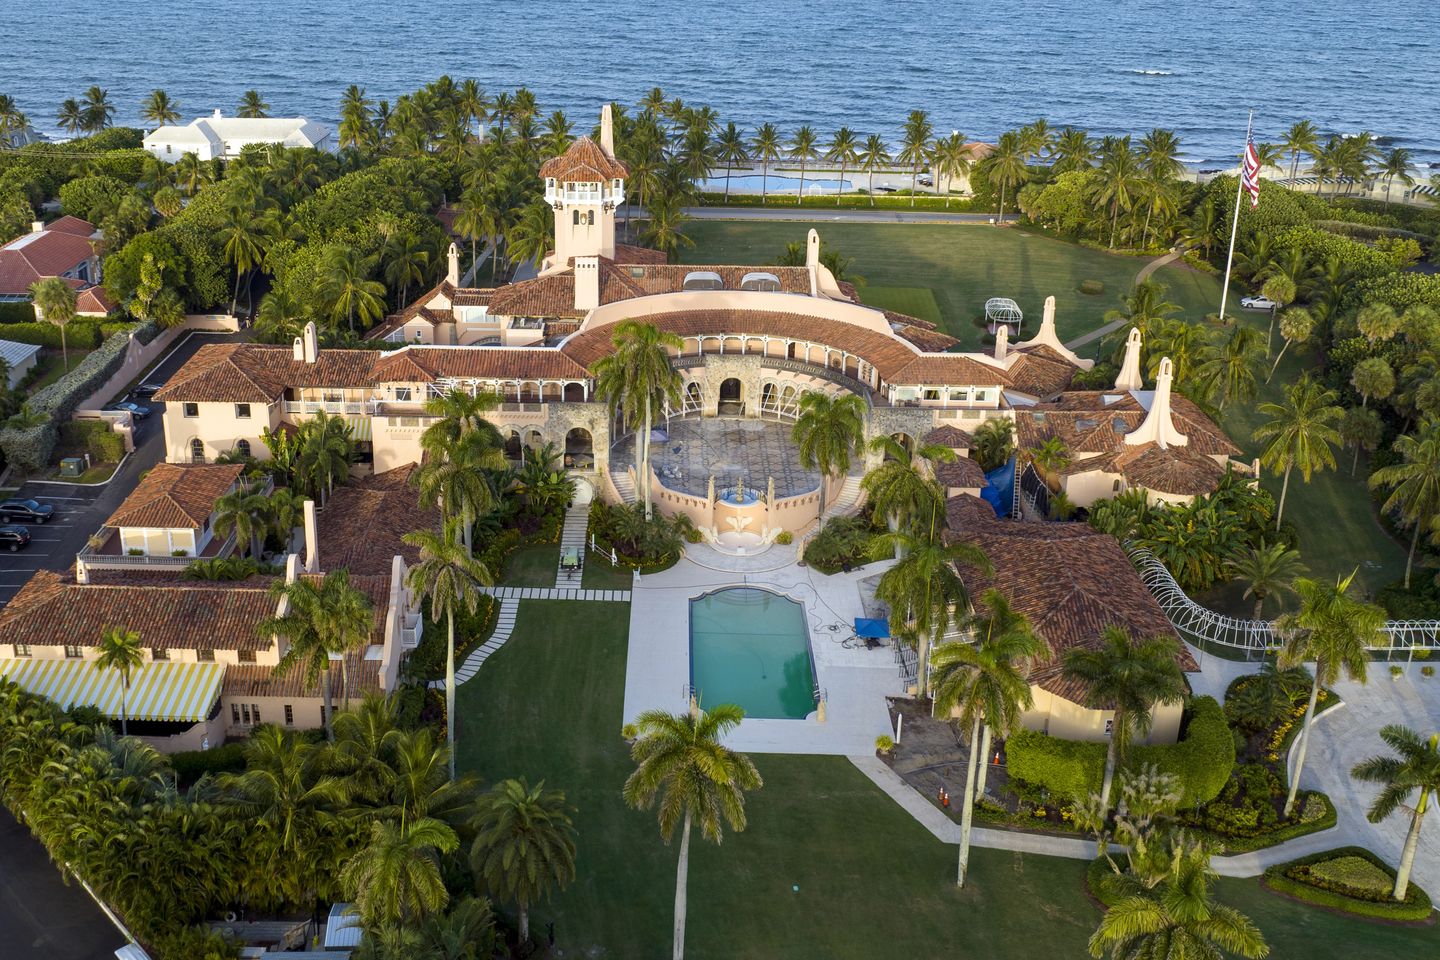 Zillow listing showing Donald Trump sold Mar-a-Lago was 'incorrect'